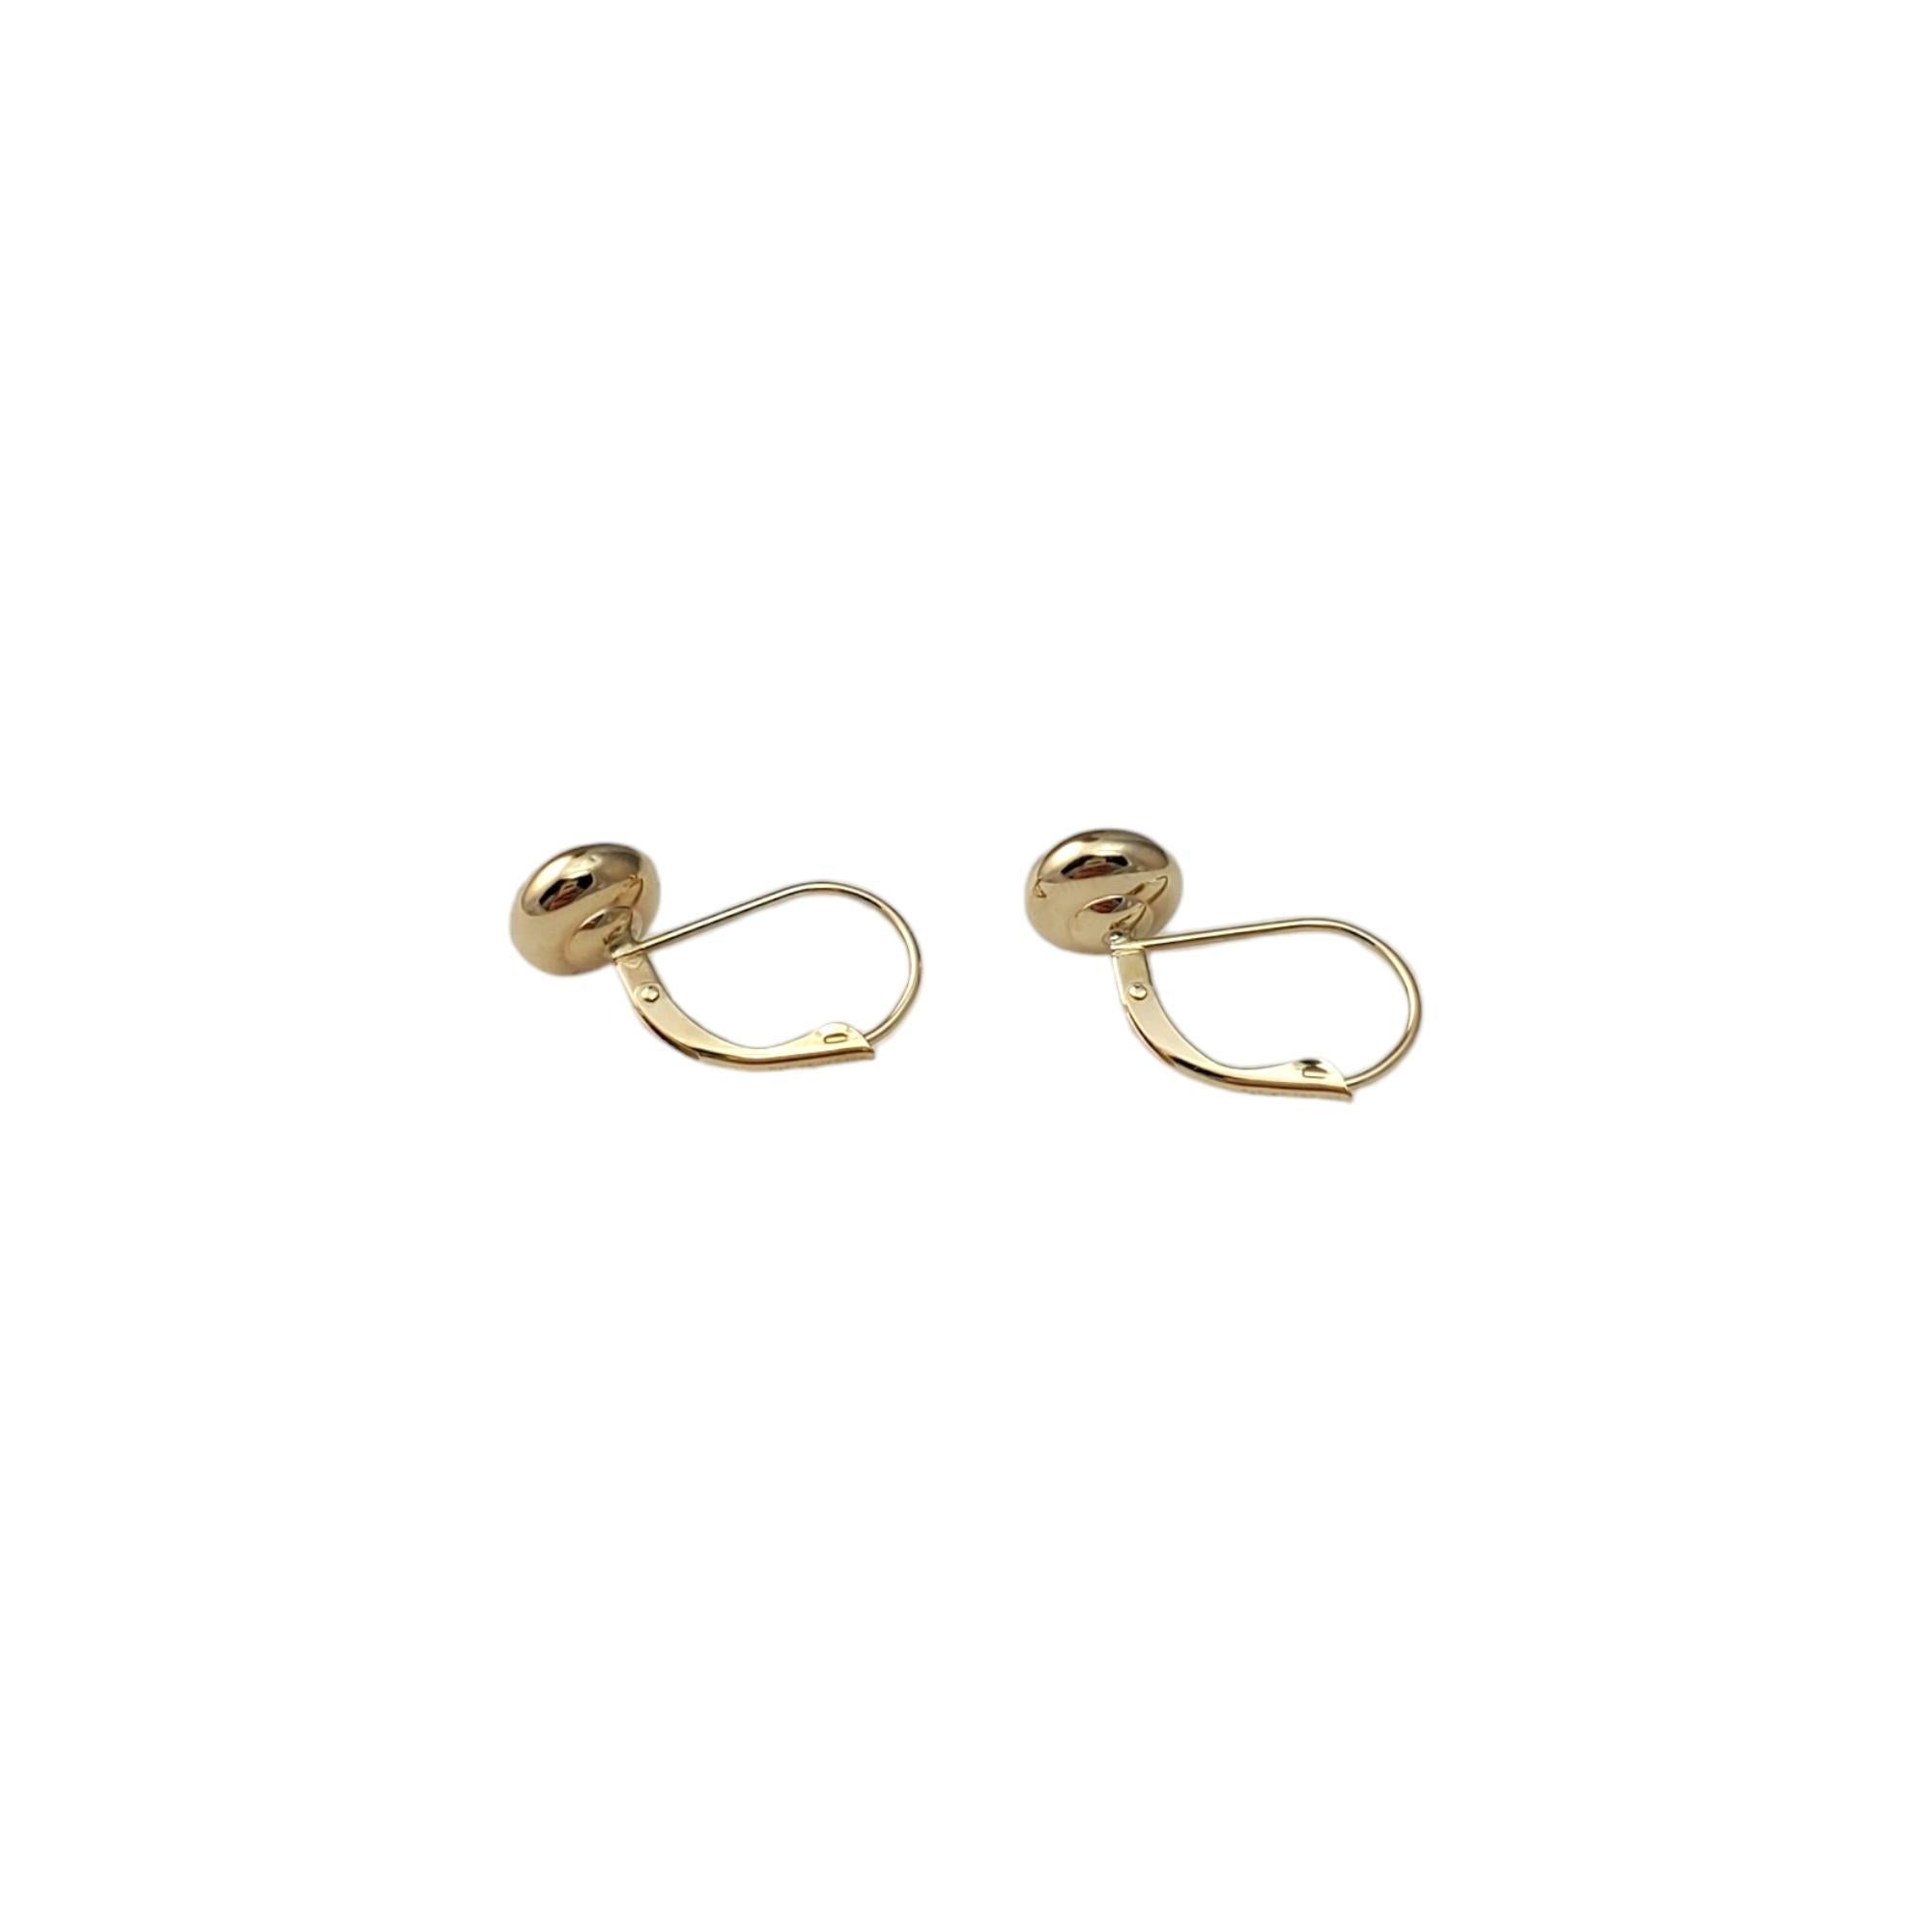 Vintage 14K Yellow Gold Earrings- 

This classic accessory adds a sleek design to any outfit. 

Size:  20.44mm X 15.82mm

Weight:  0.5 dwt. /  0.78 gr.

Stamped 585 SEG

Very good condition, professionally polished.

Will come packaged in a gift box